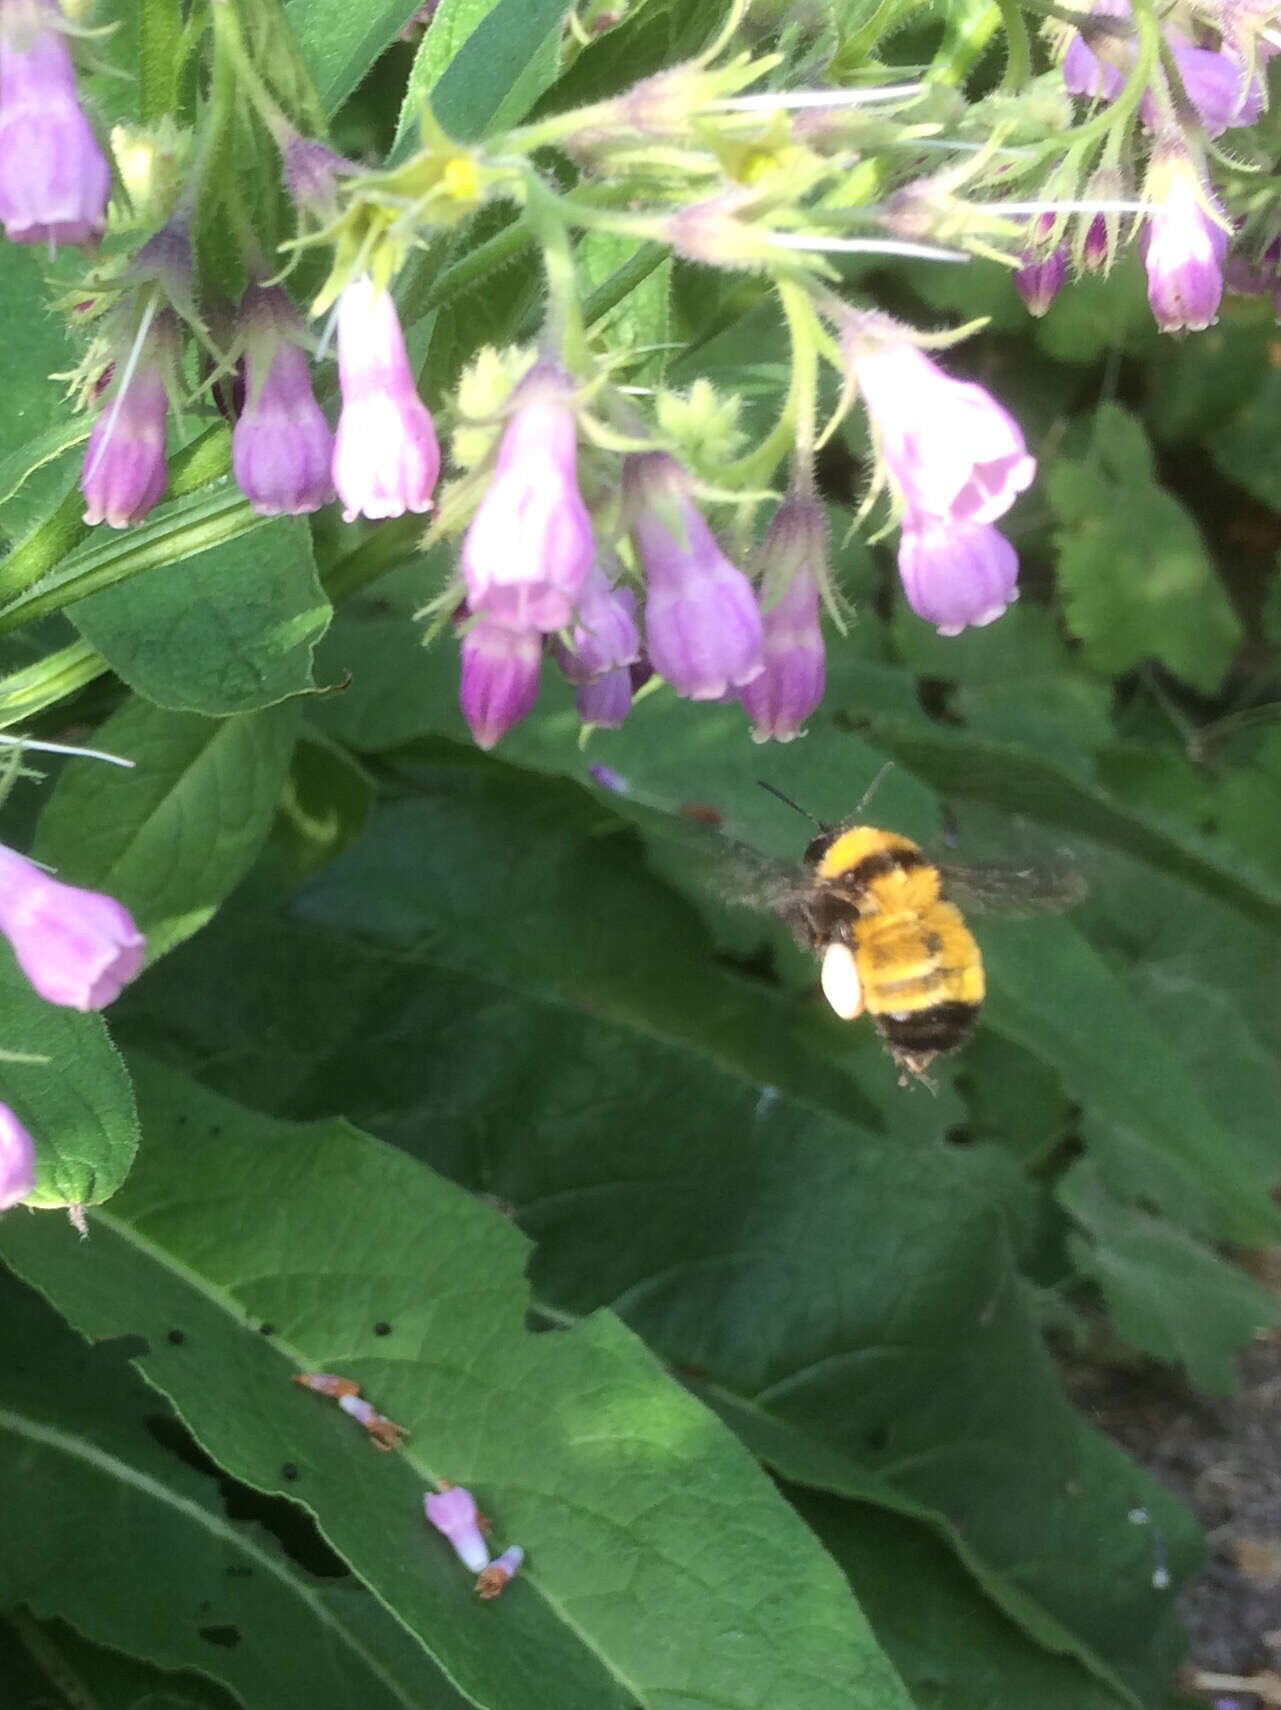 Image of Sonoran Bumble Bee